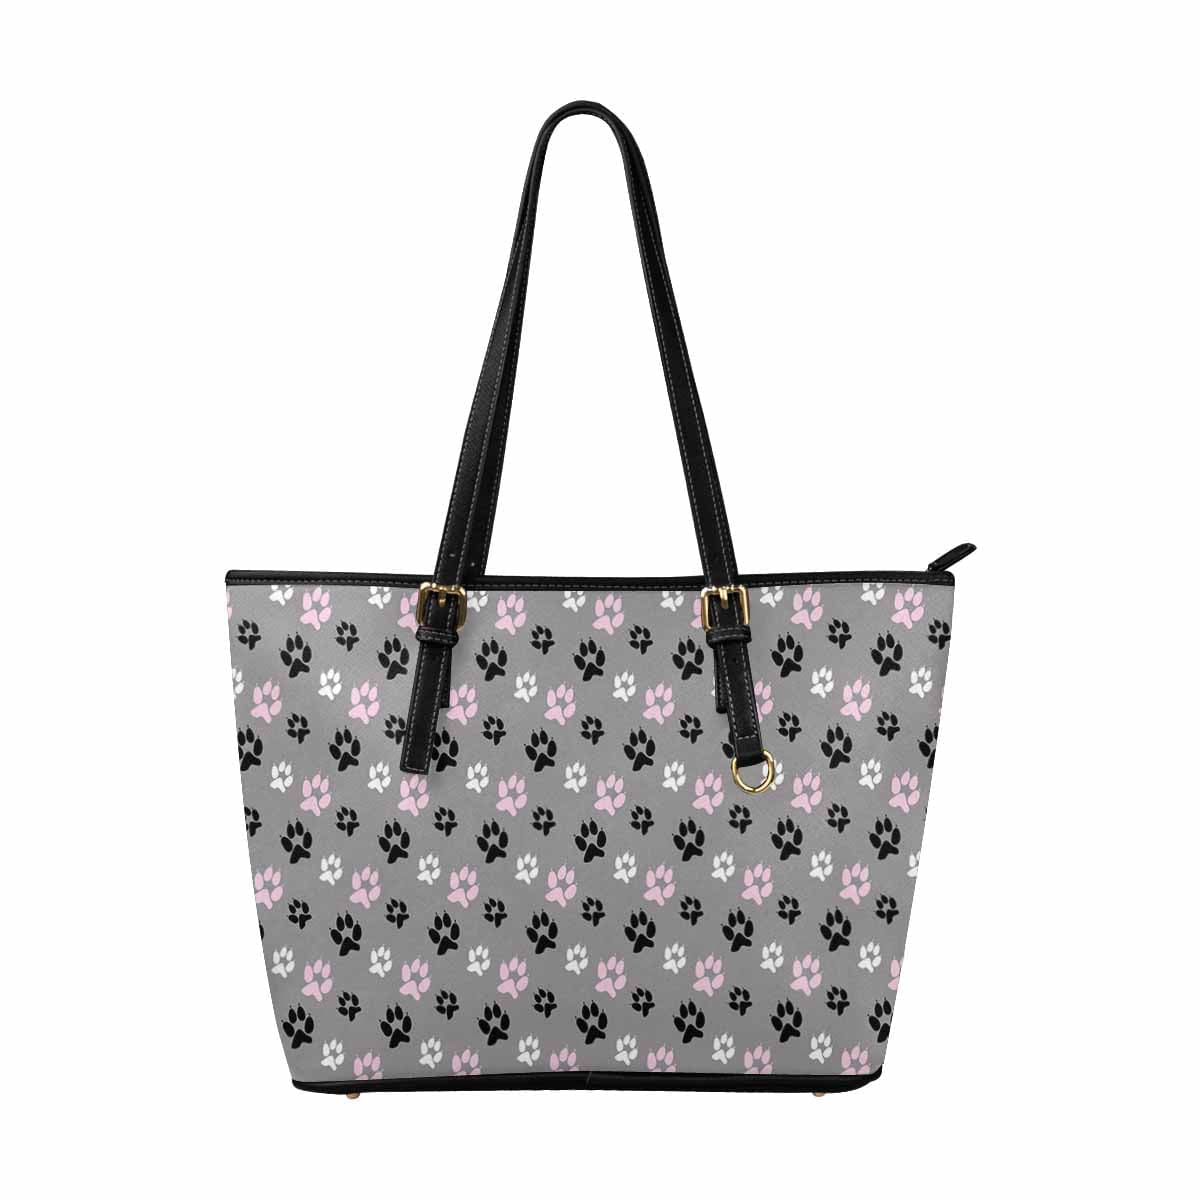 Large Leather Tote Shoulder Bag - Tri-color Paws Grey Tote - Bags | Leather